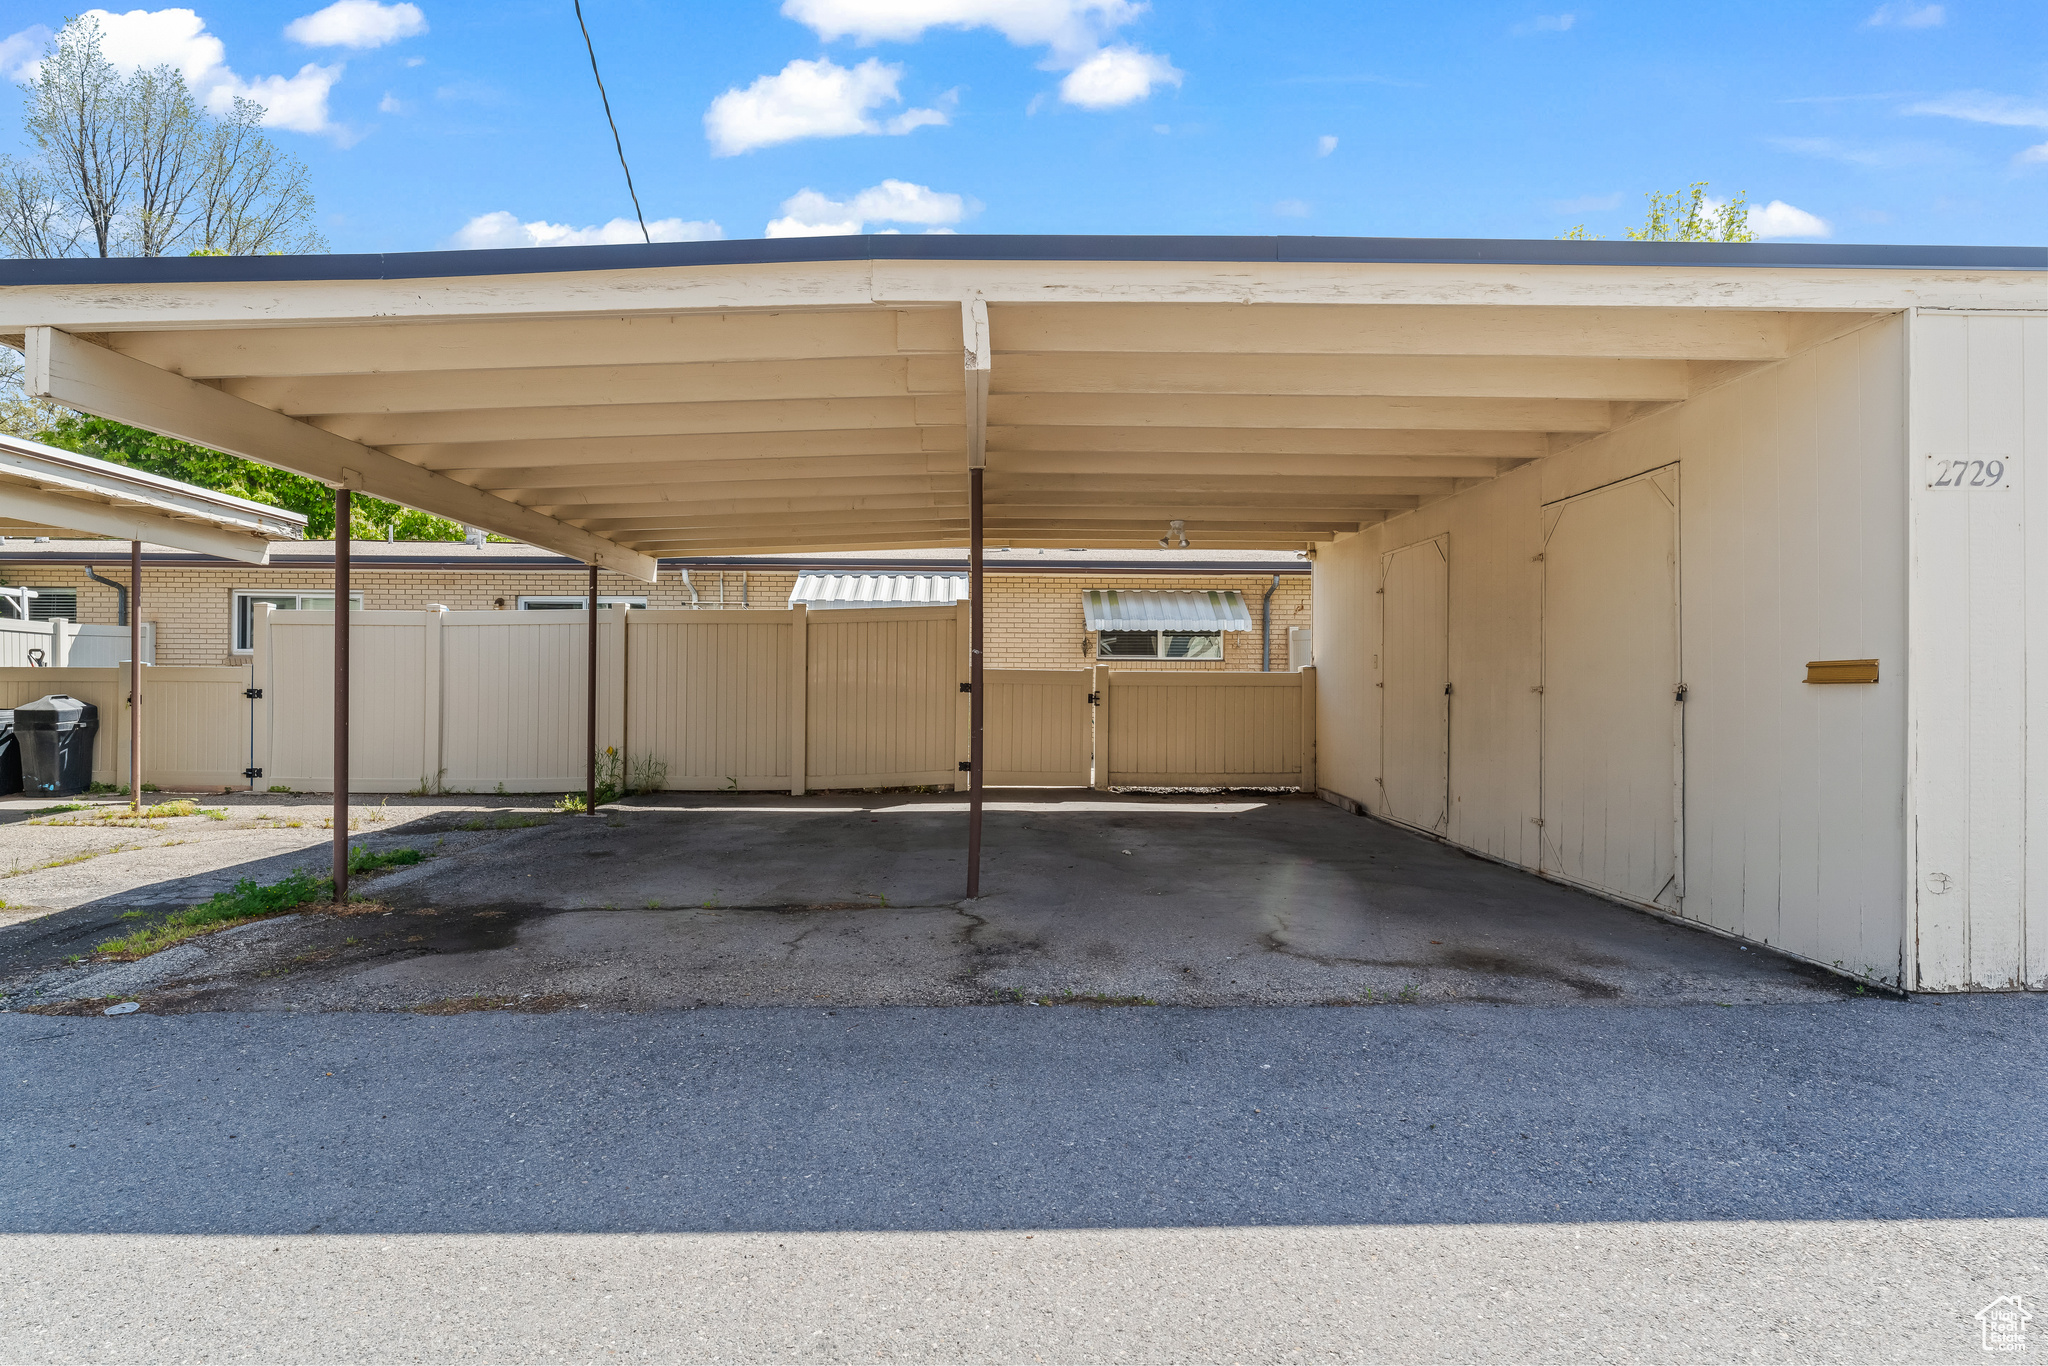 Covered double carport with large storage units